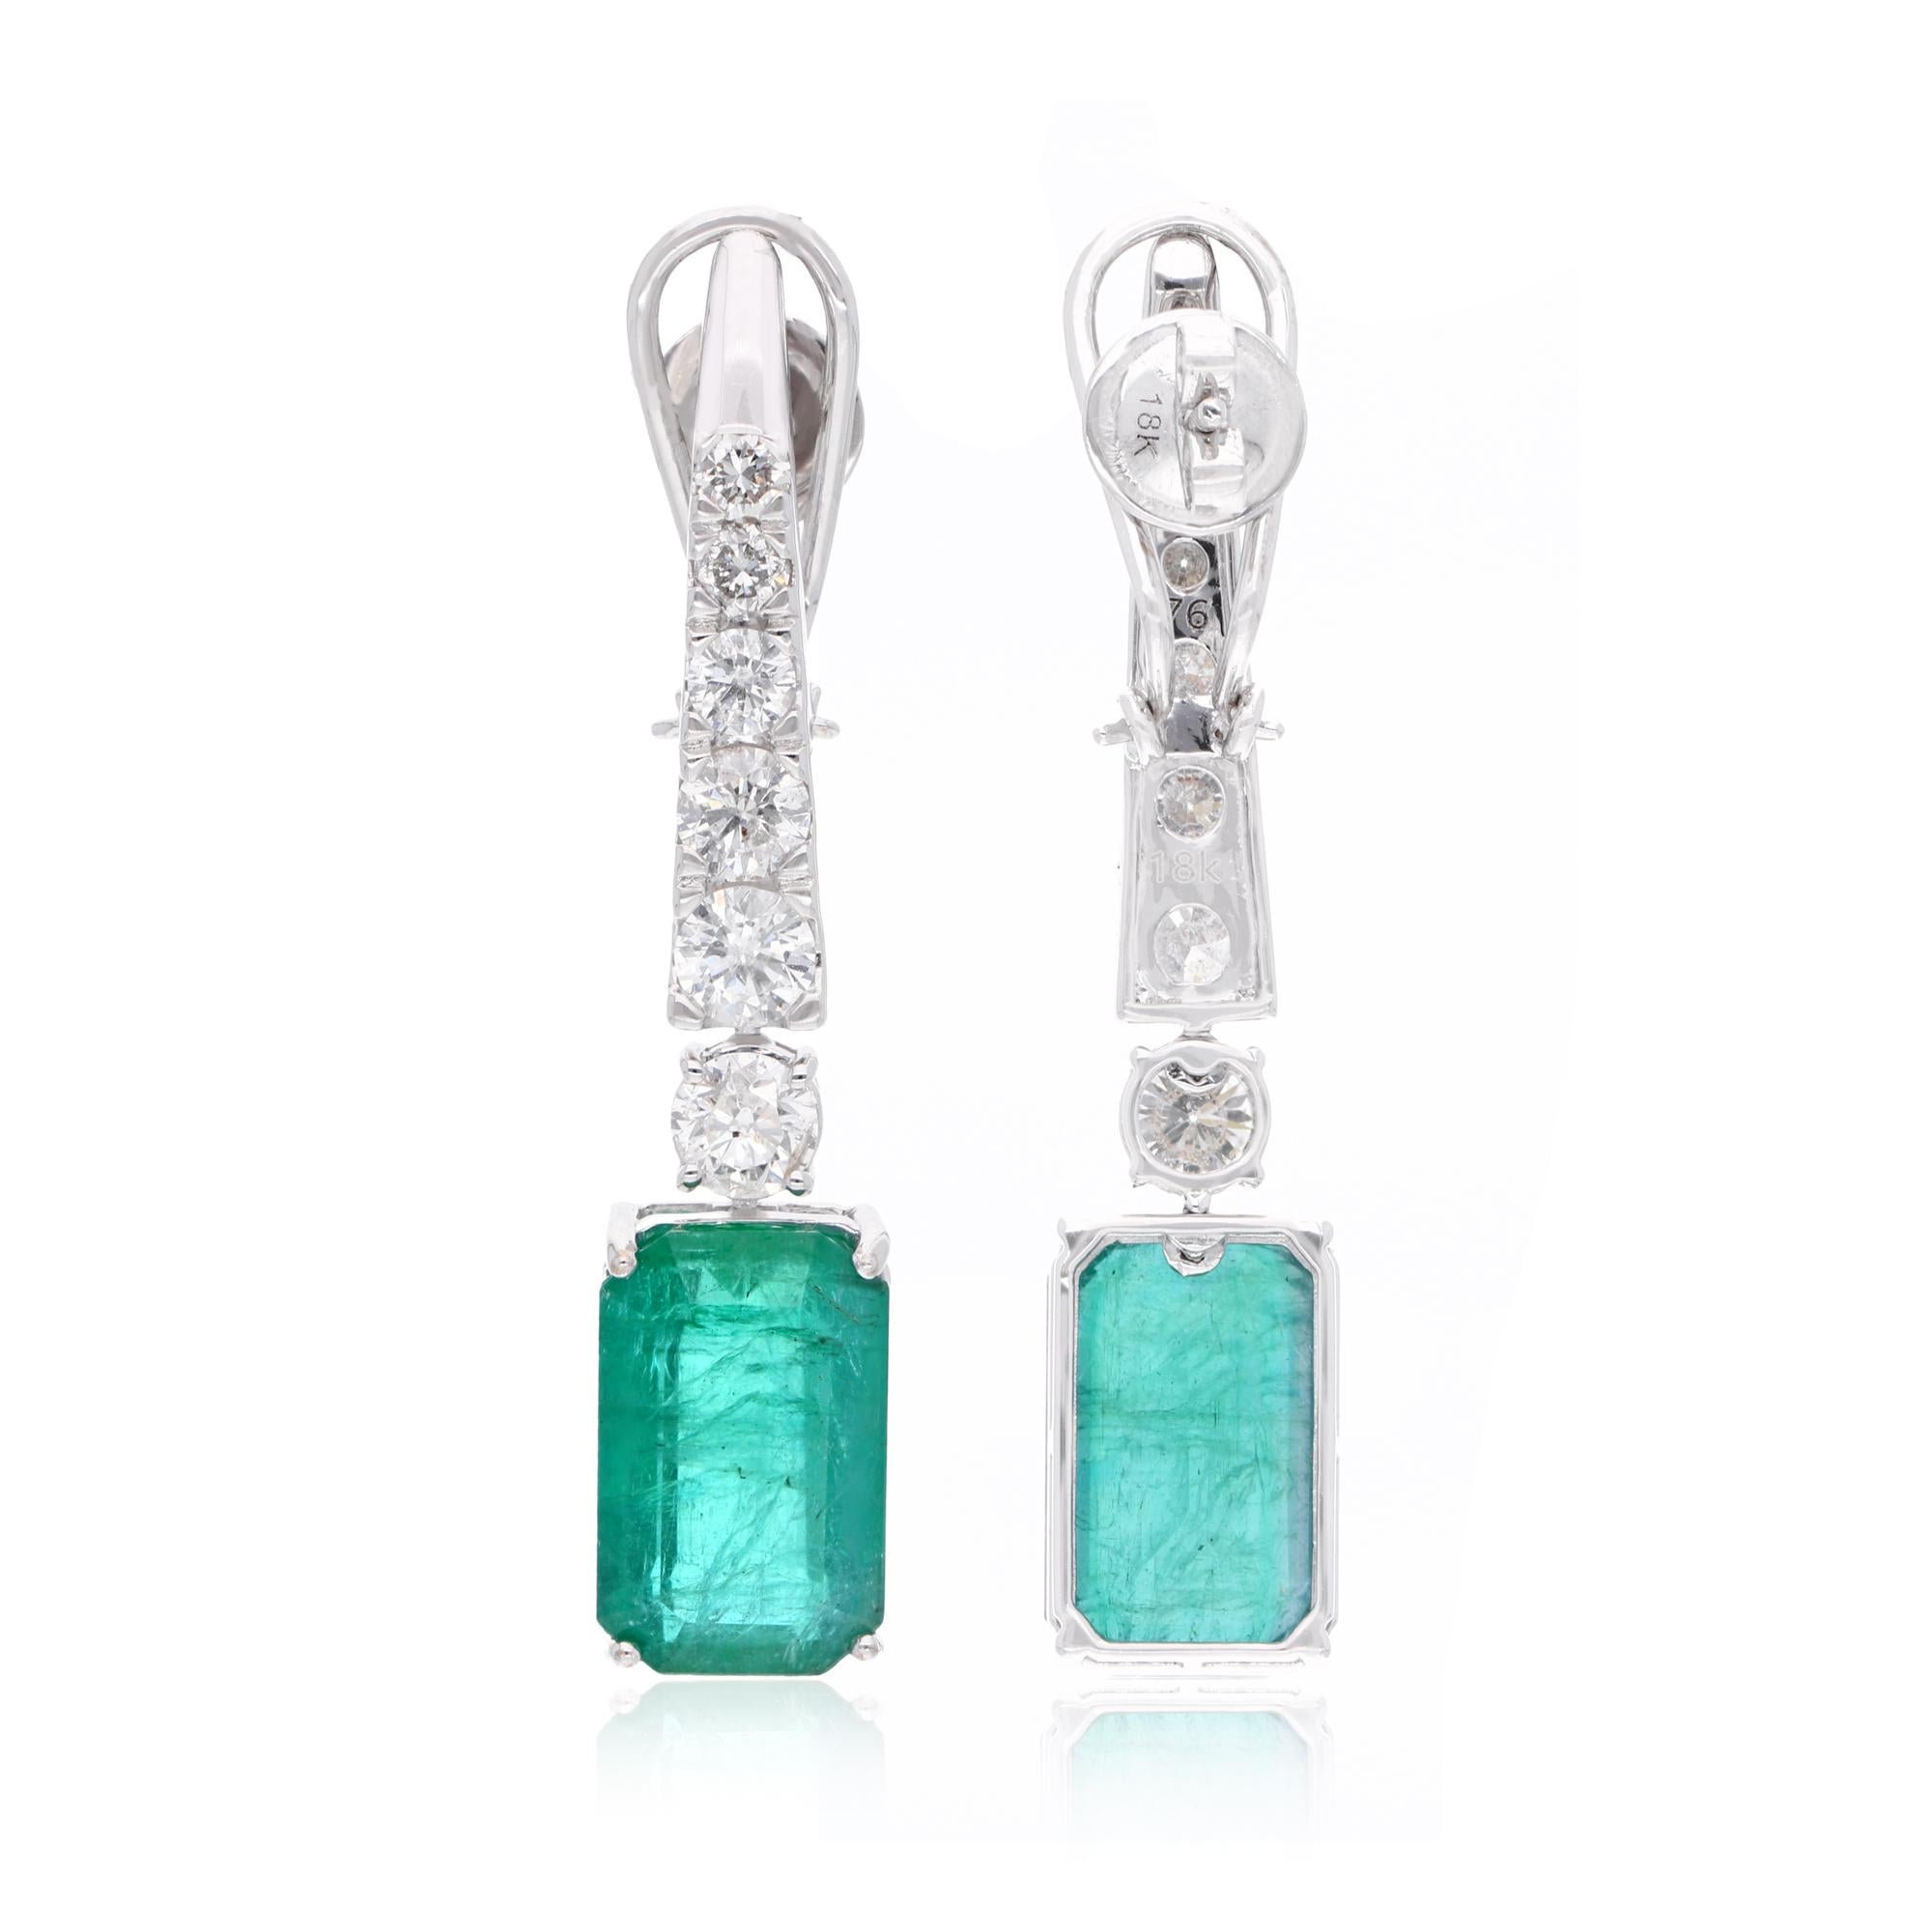 Item Code :- SEE-12635A
Gross Wt. :- 12.98 gm
18k White Gold Wt. :- 9.40 gm
Natural Diamond Wt. :- 3.06 Ct. ( AVERAGE DIAMOND CLARITY SI1-SI2 & COLOR H-I )
Natural Emerald Wt. :- 14.84 Ct.
Earrings Size :- 45 mm approx.

✦